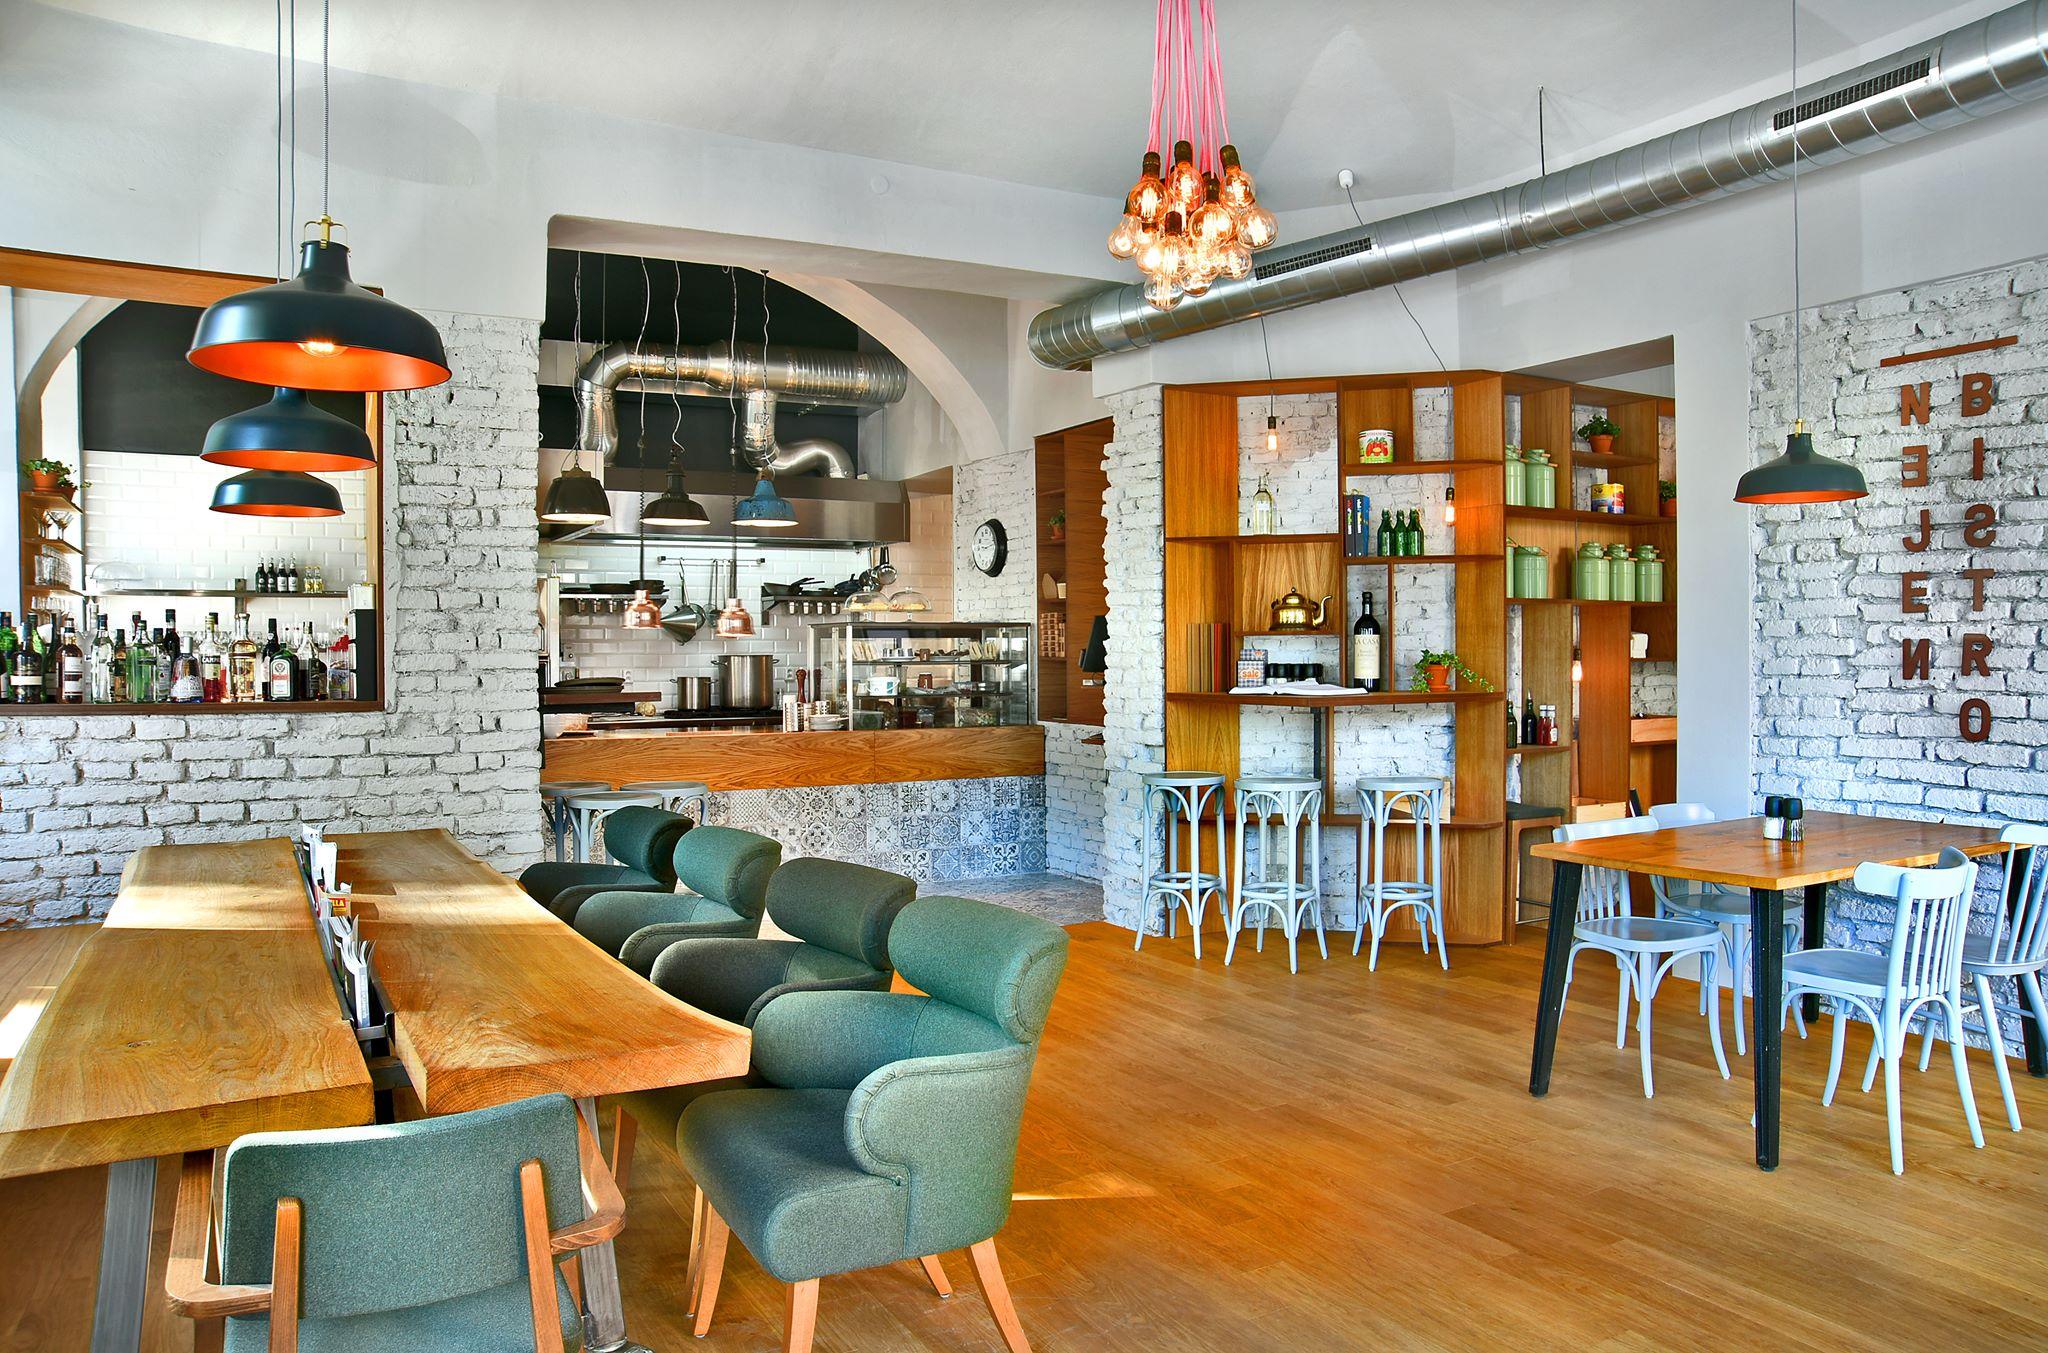 Cover image of this place Nejen Bistro